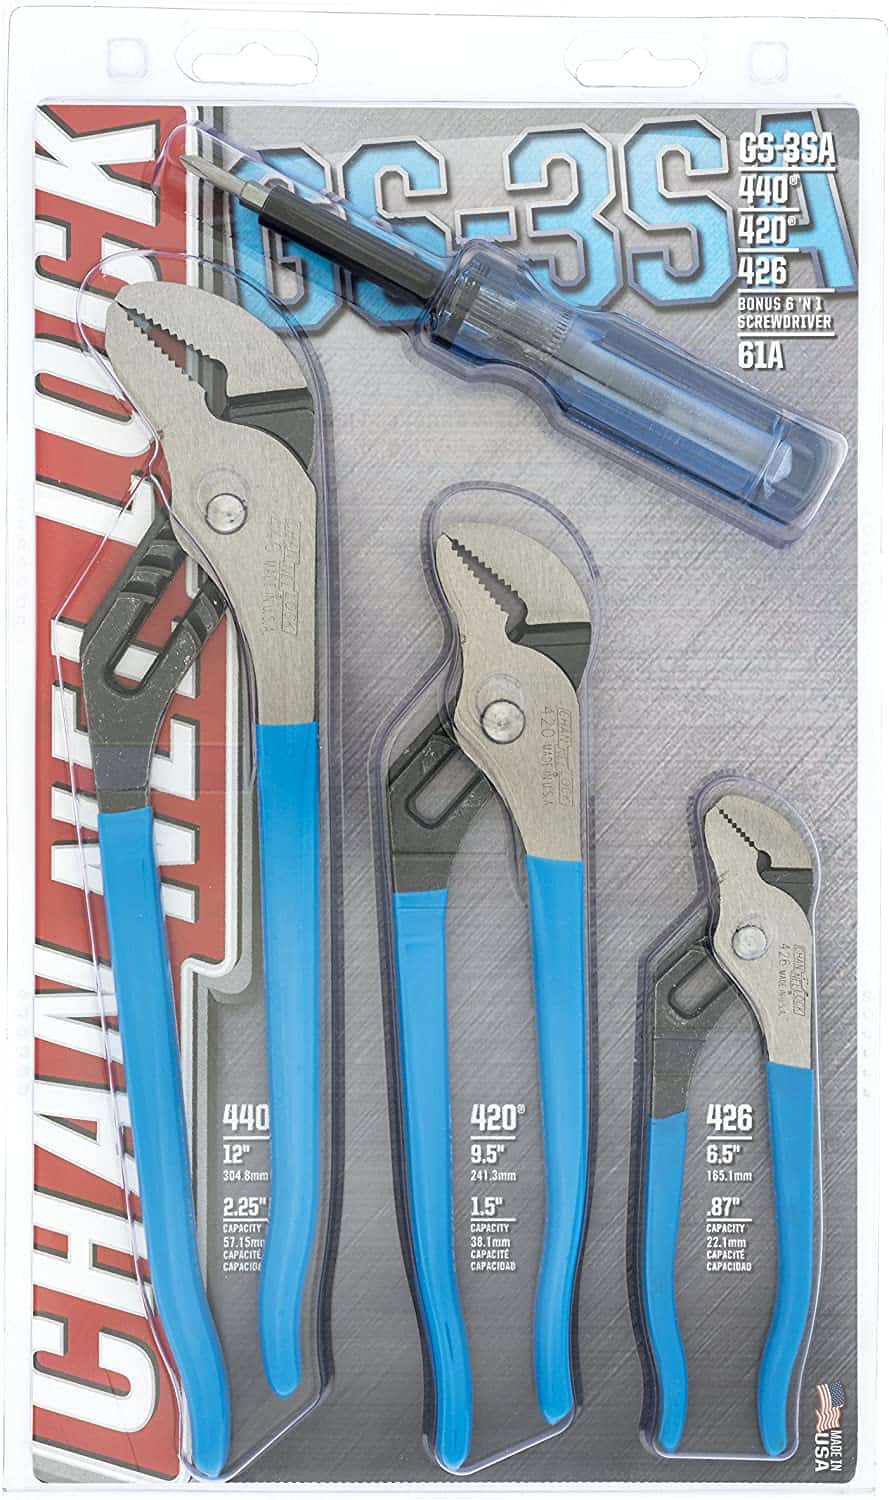 Best tongue and groove pliers set: Channellock GS-3SA